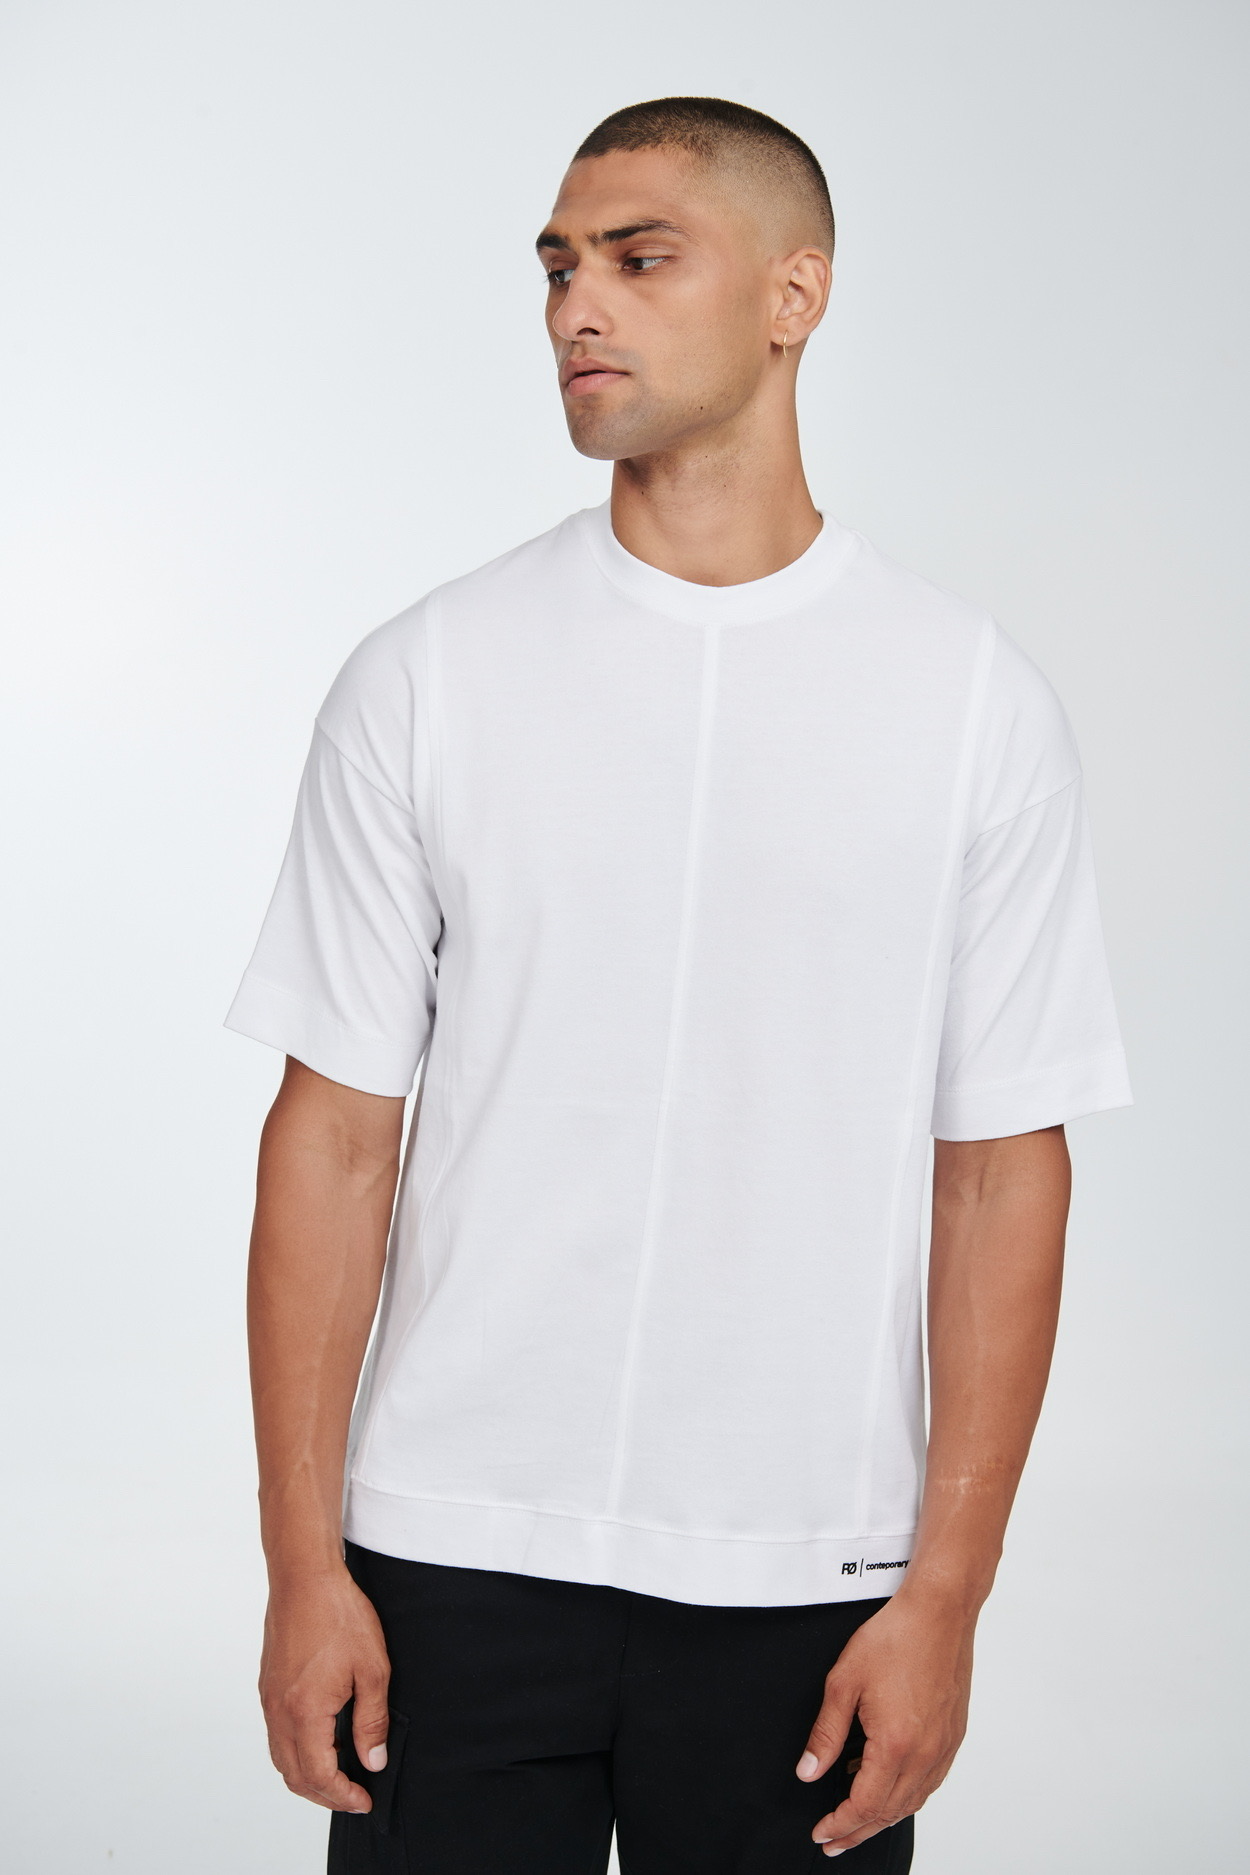 PCOC DOWN THE LINE OVERSIZED LOGO TEE